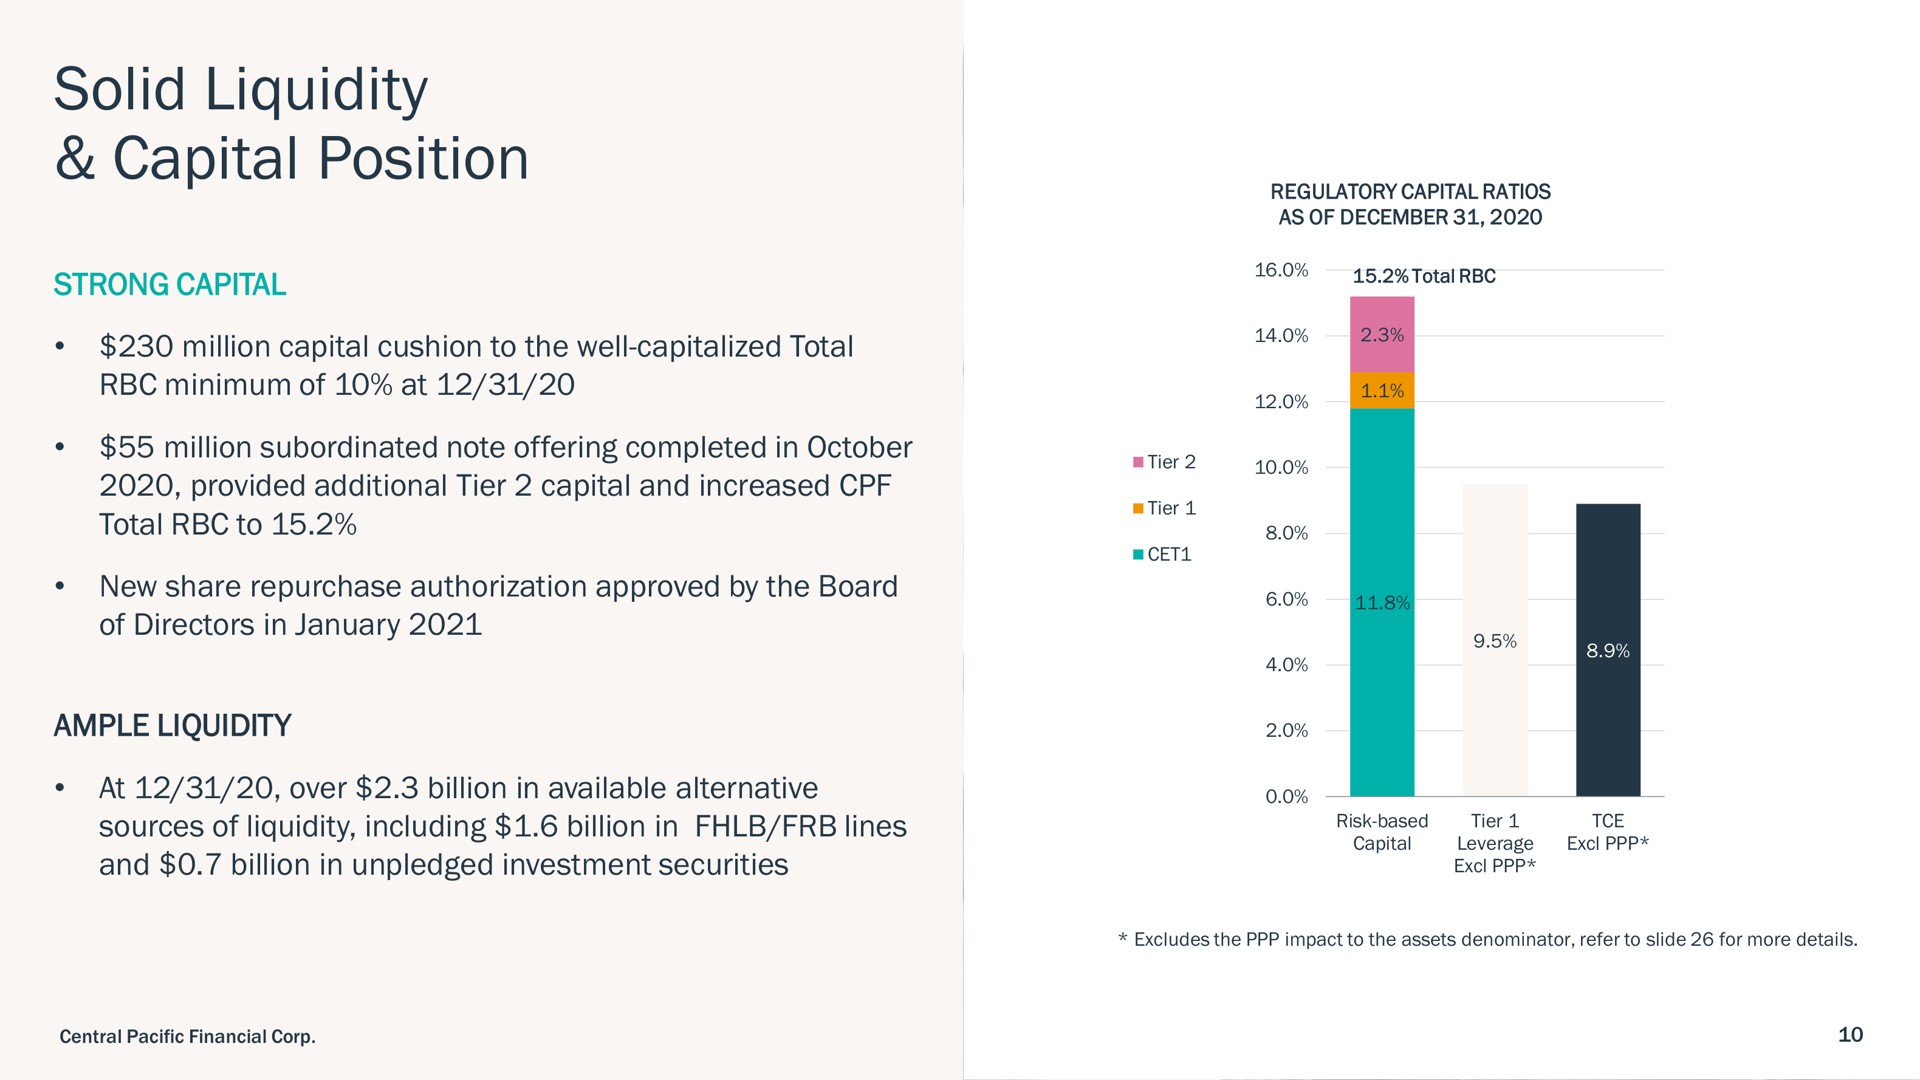 solid liquidity capital position | Central Pacific Financial